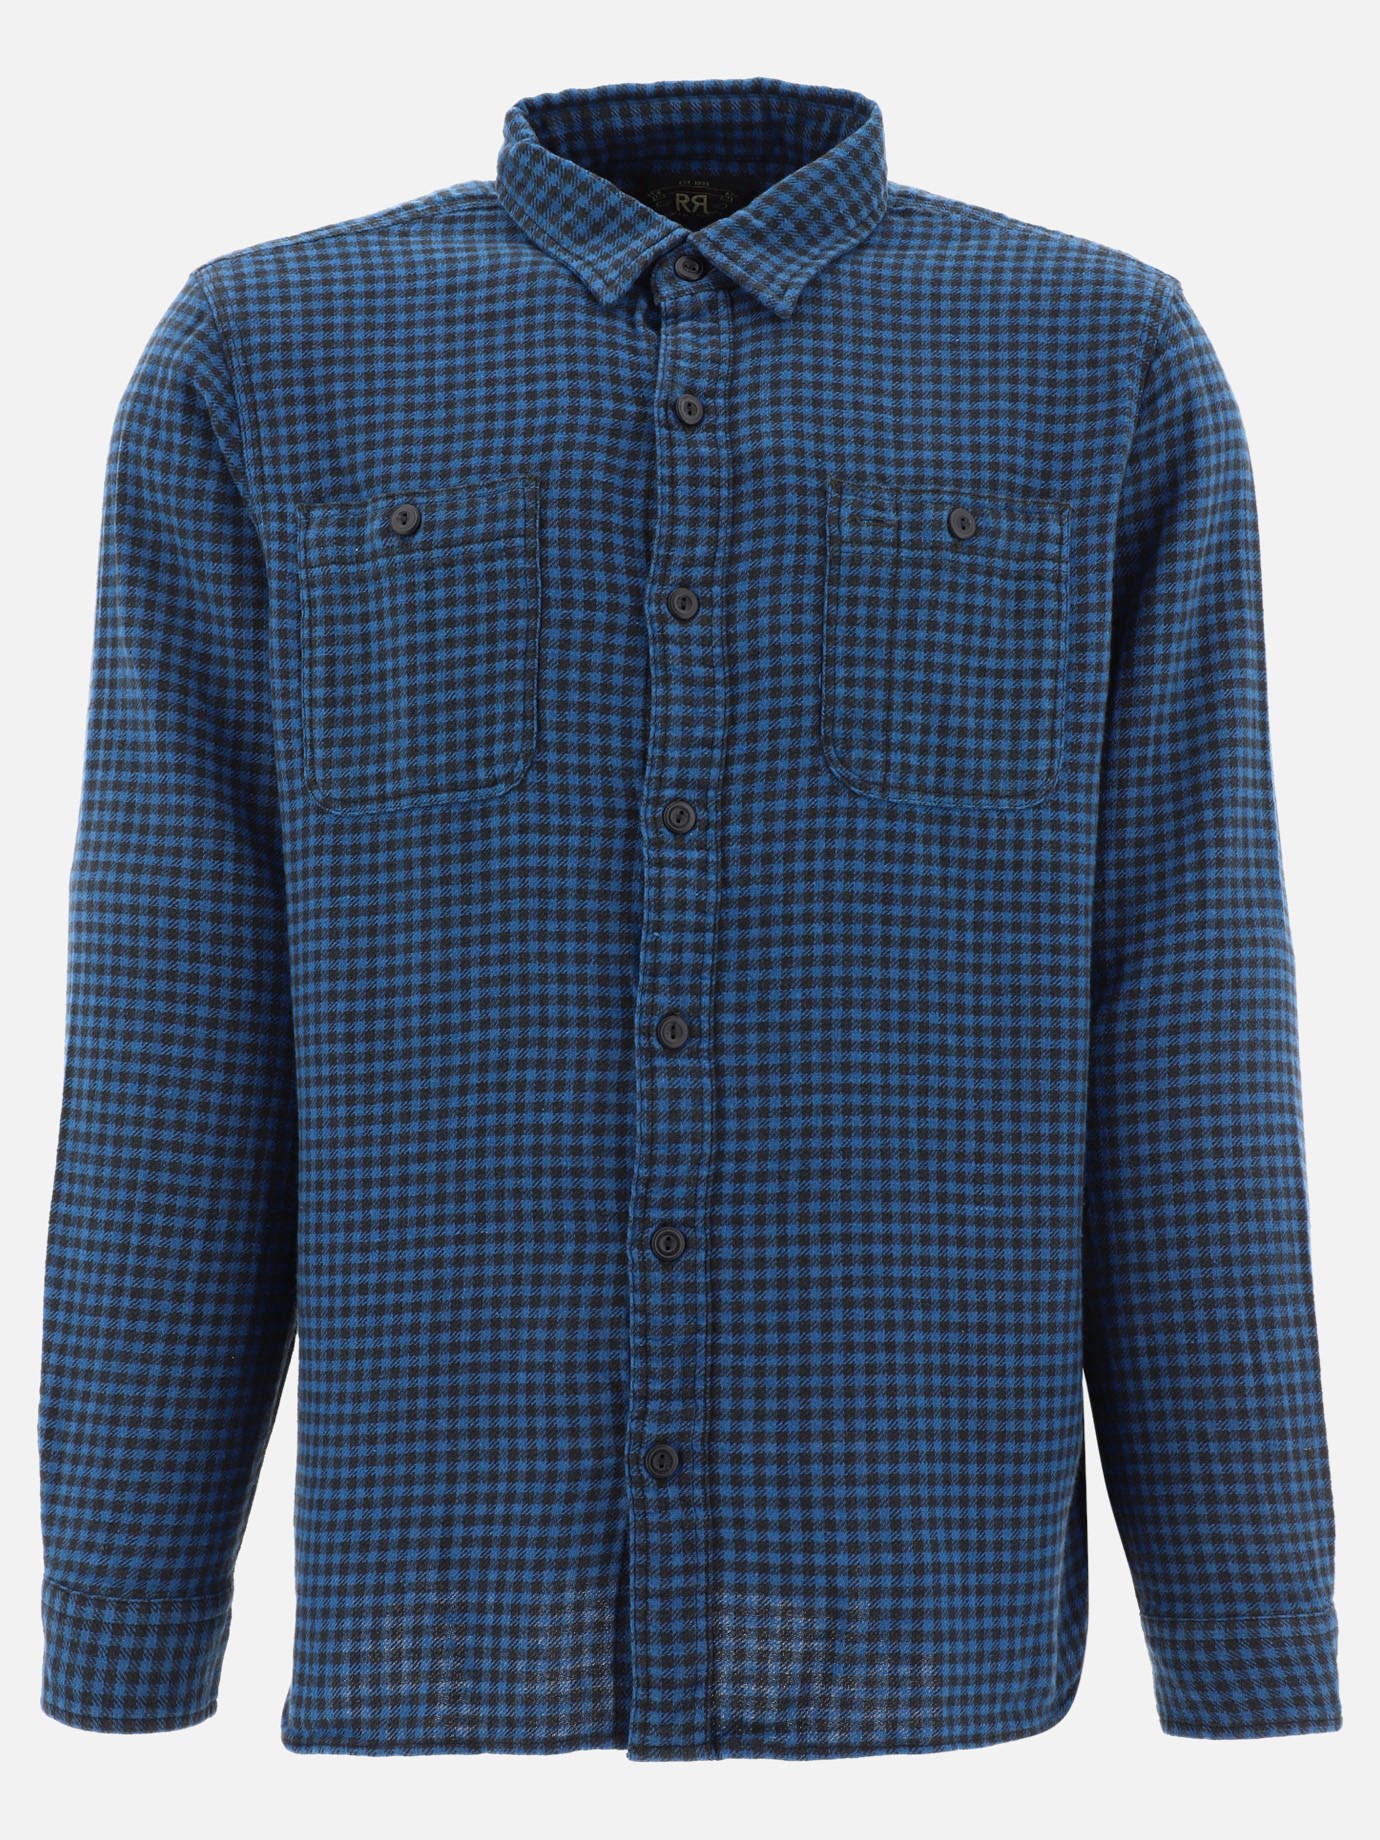 Checked twill shirtby RRL by Ralph Lauren - 4